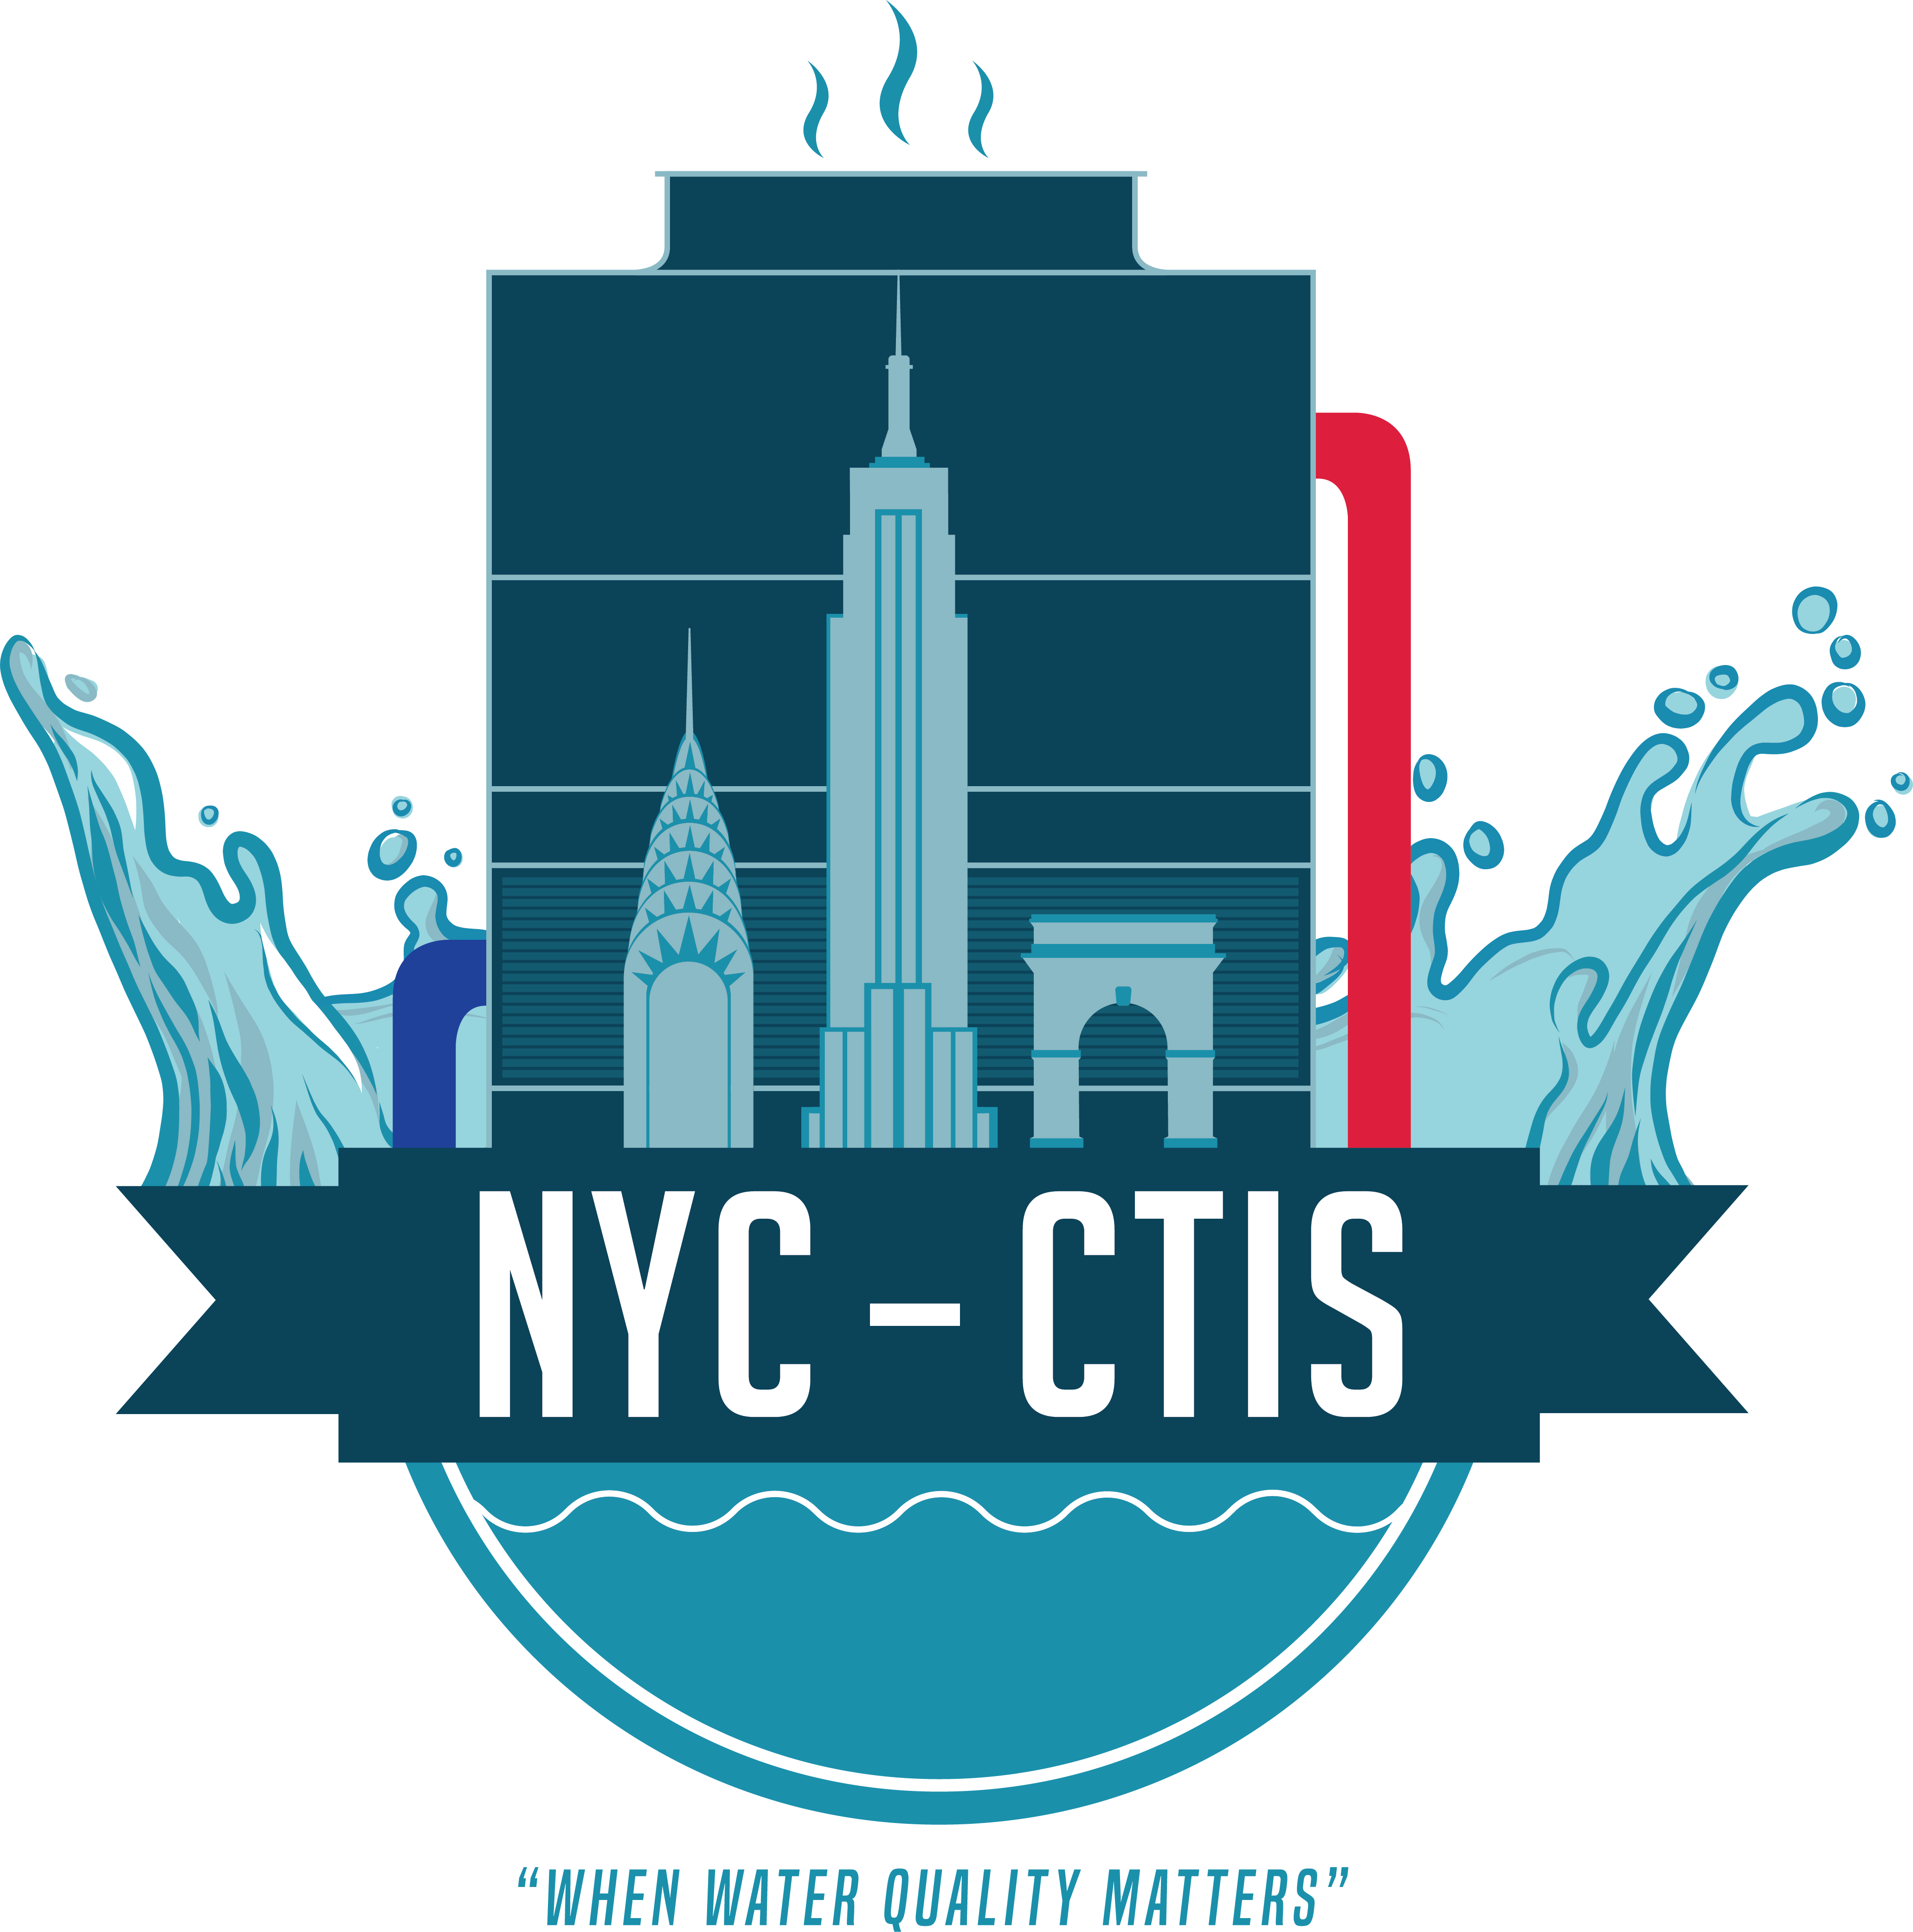 NYC-CTIS: NYC Cooling Tower Inspections & Services